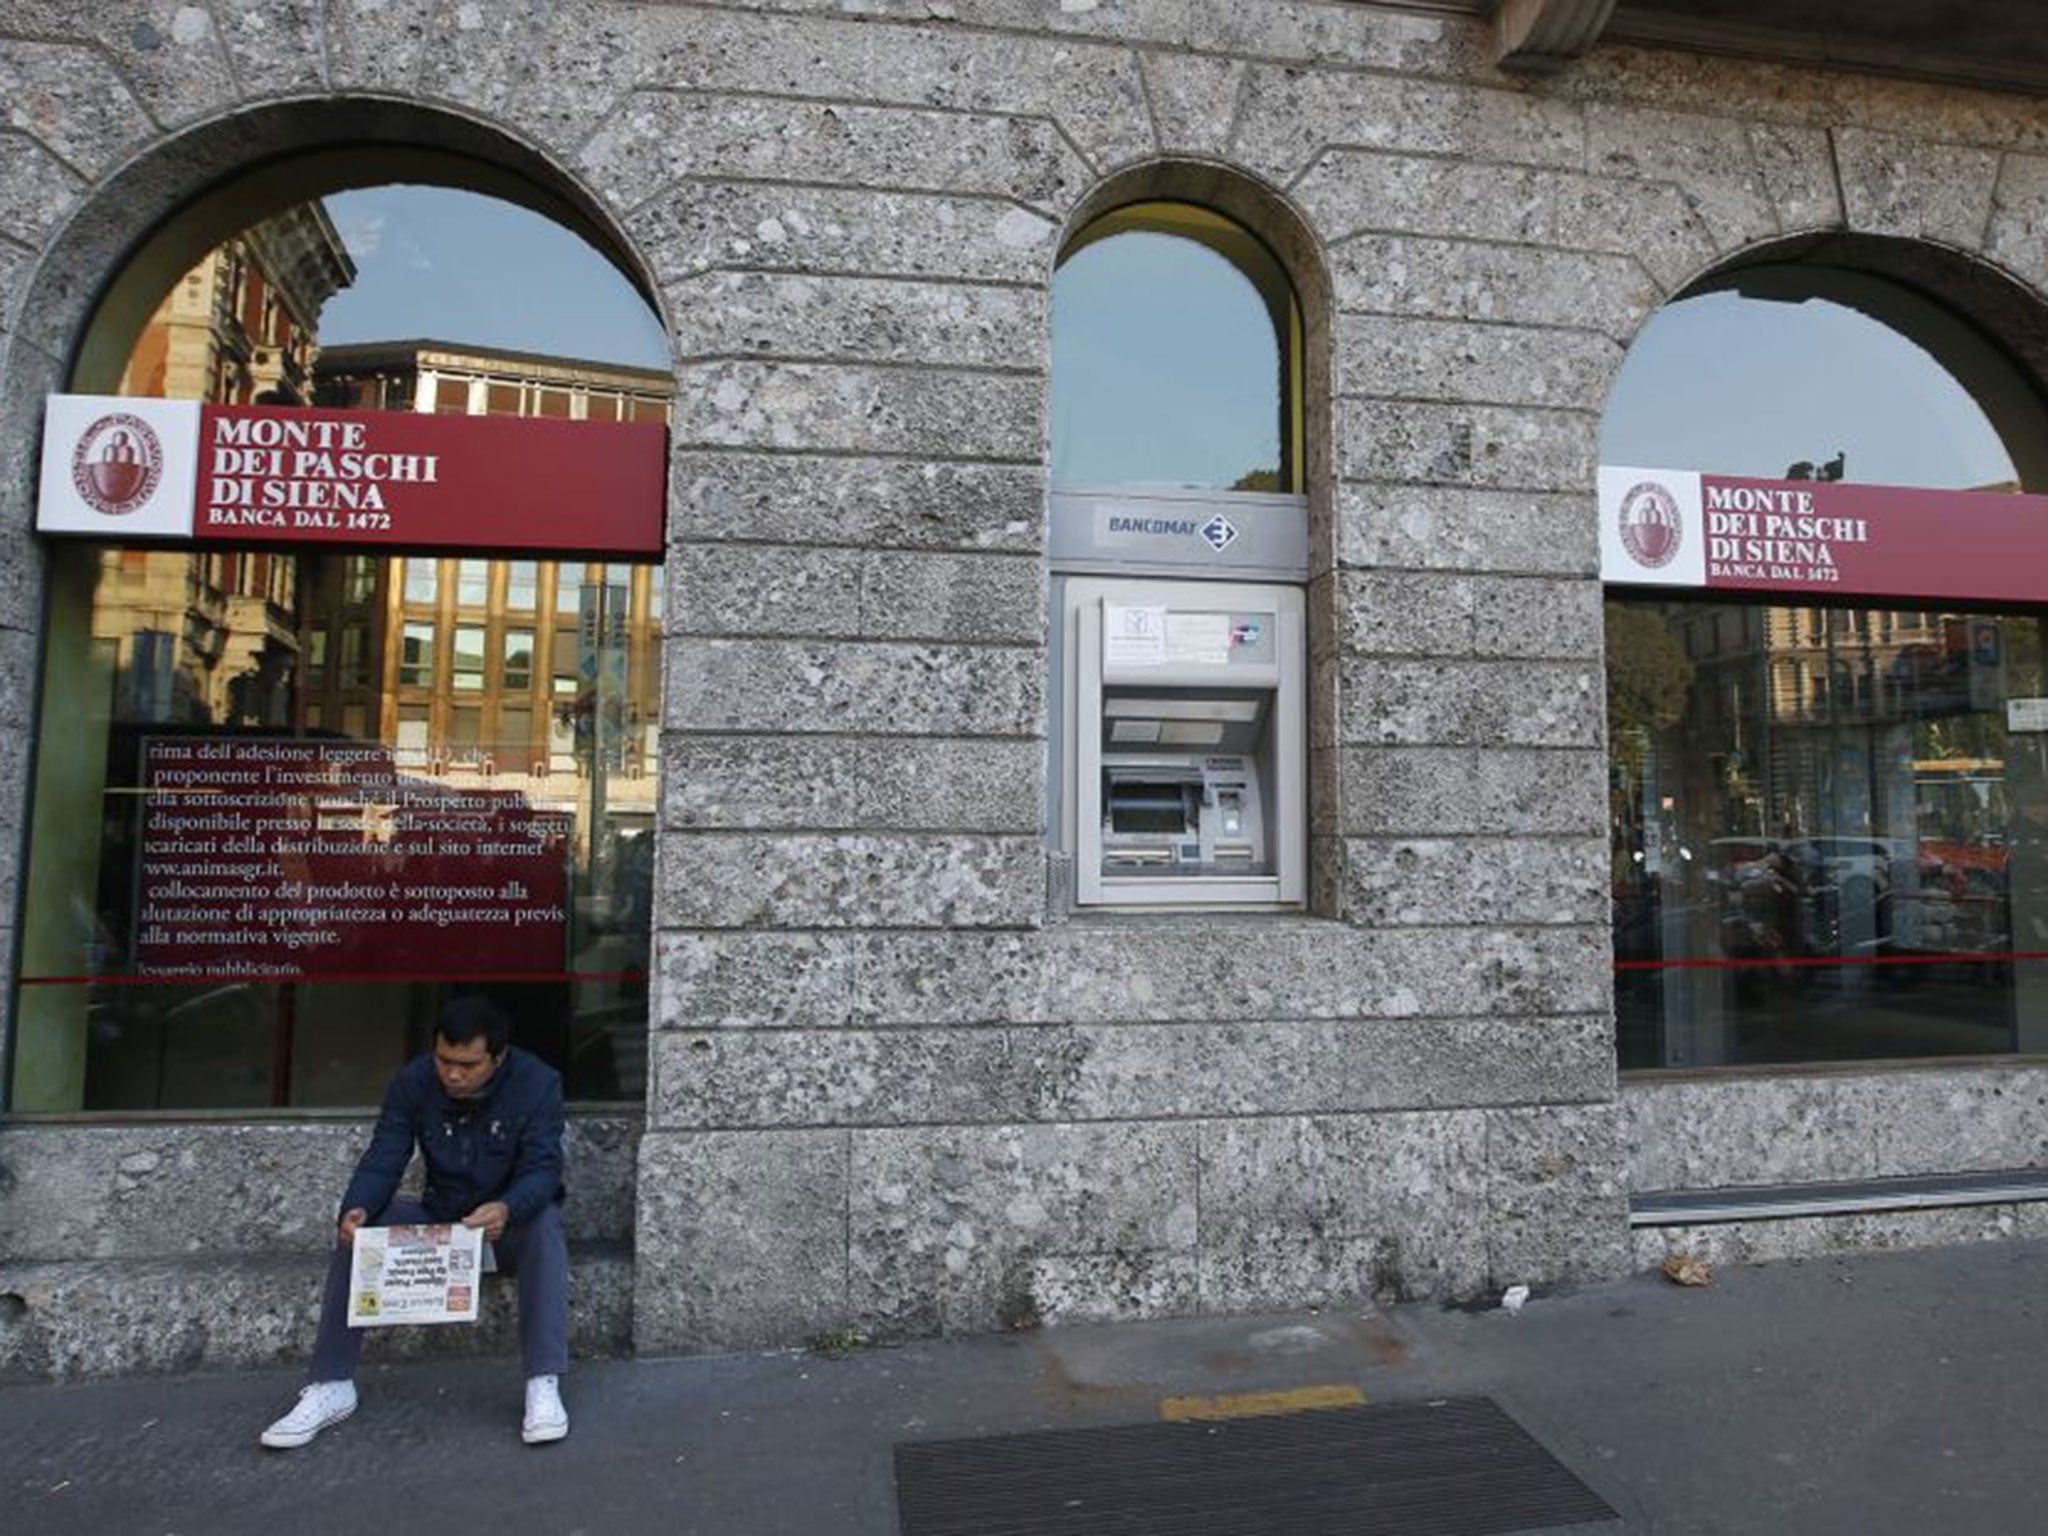 Shares in the world’s oldest bank Monte dei Paschi were suspended